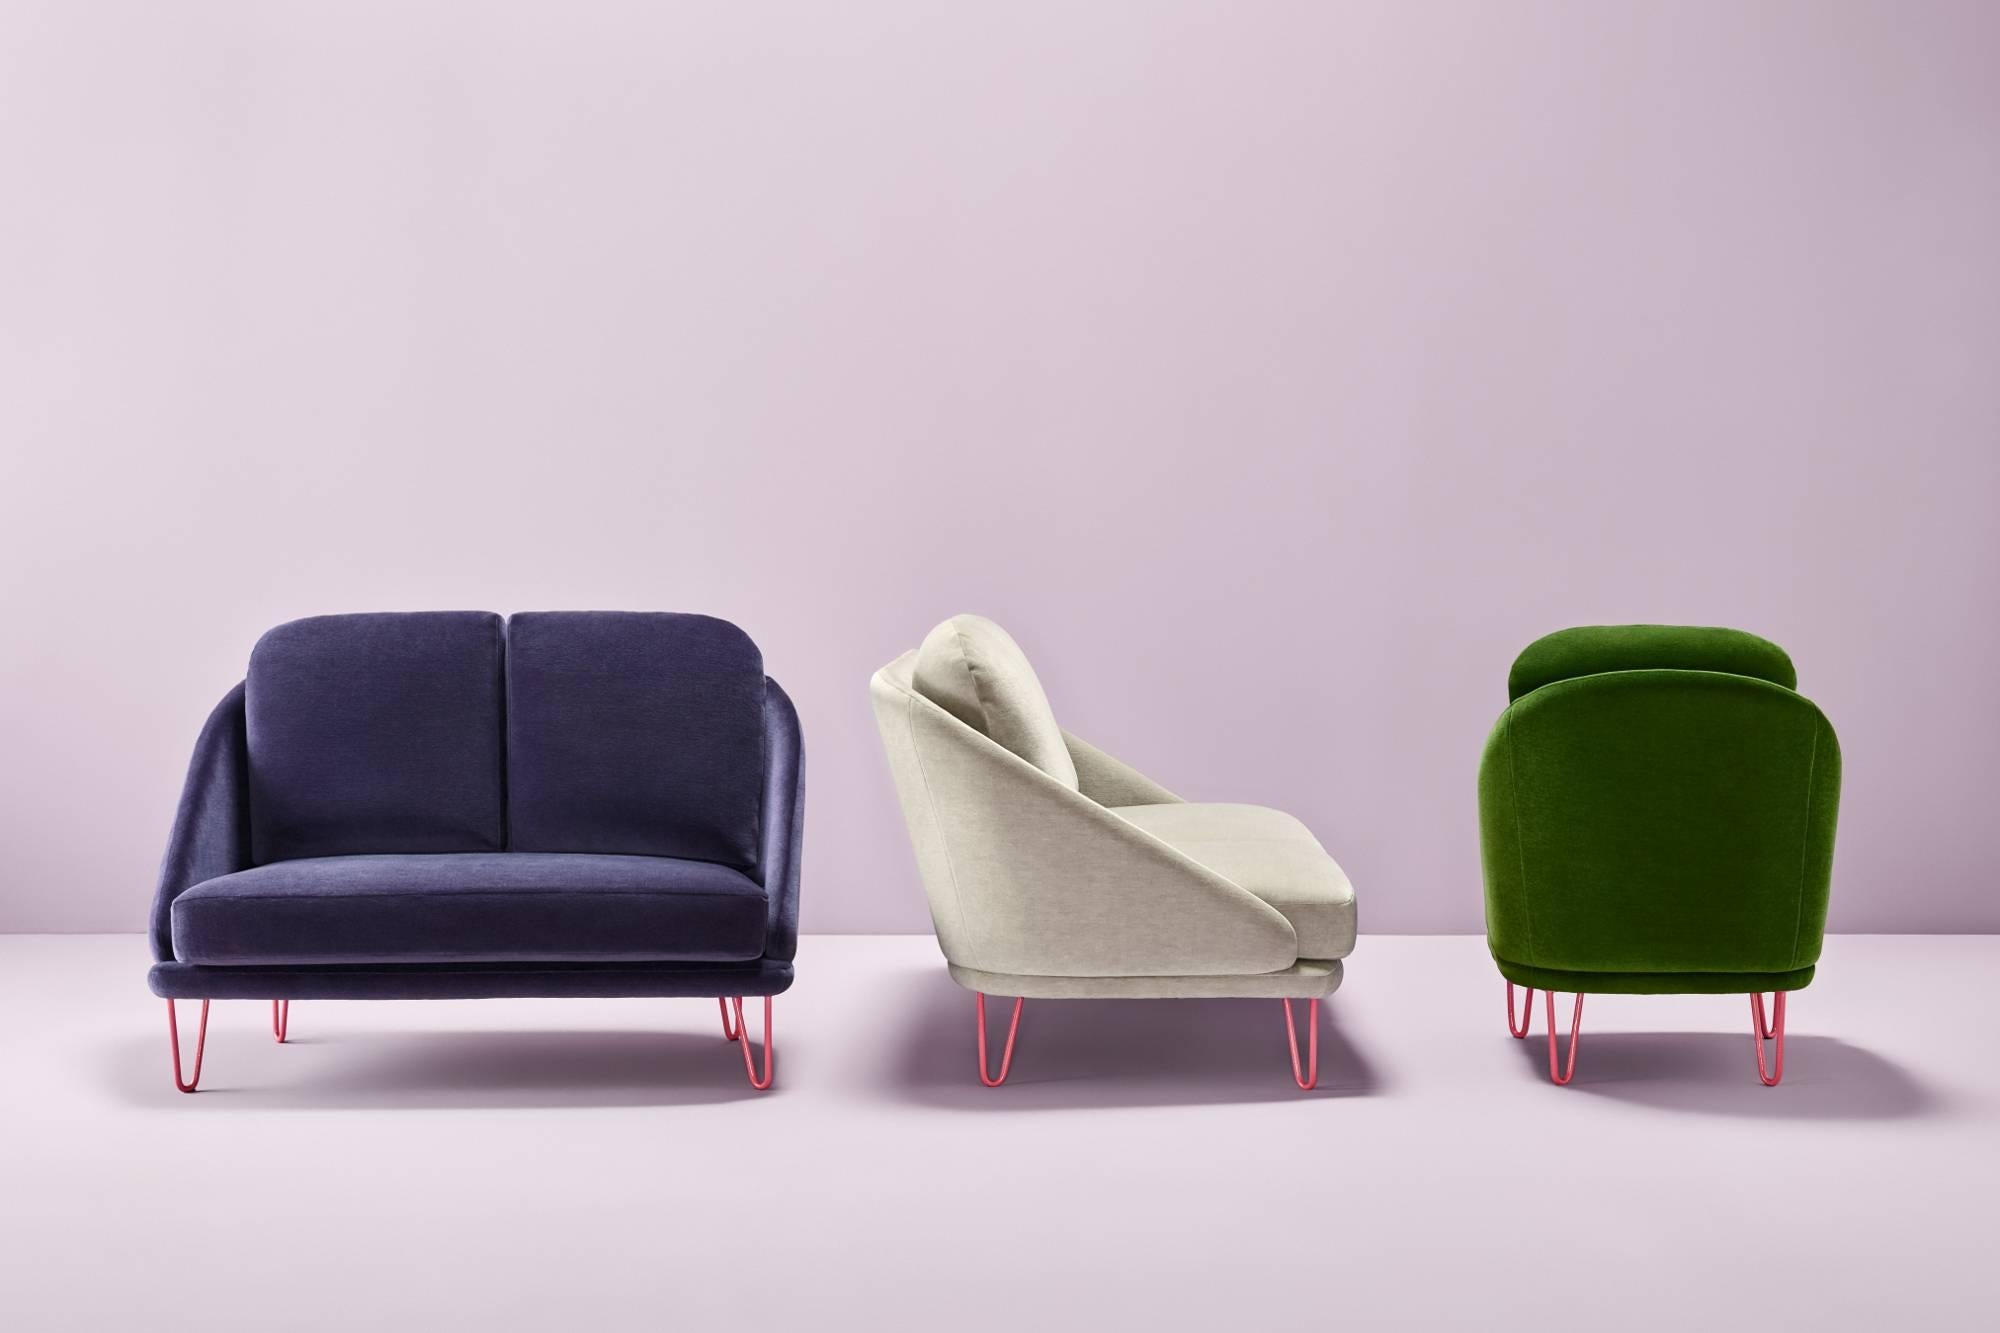 Agora Creme Sofa by Pepe Albargues
Dimensions: Height 94 cm, depth 98 cm, width 198 cm.
Materials: Iron and beech wood structure. Seat cushions stuffed with polyurethane covered with polyester fibre. Backrest cushions stuffed with 50% goose